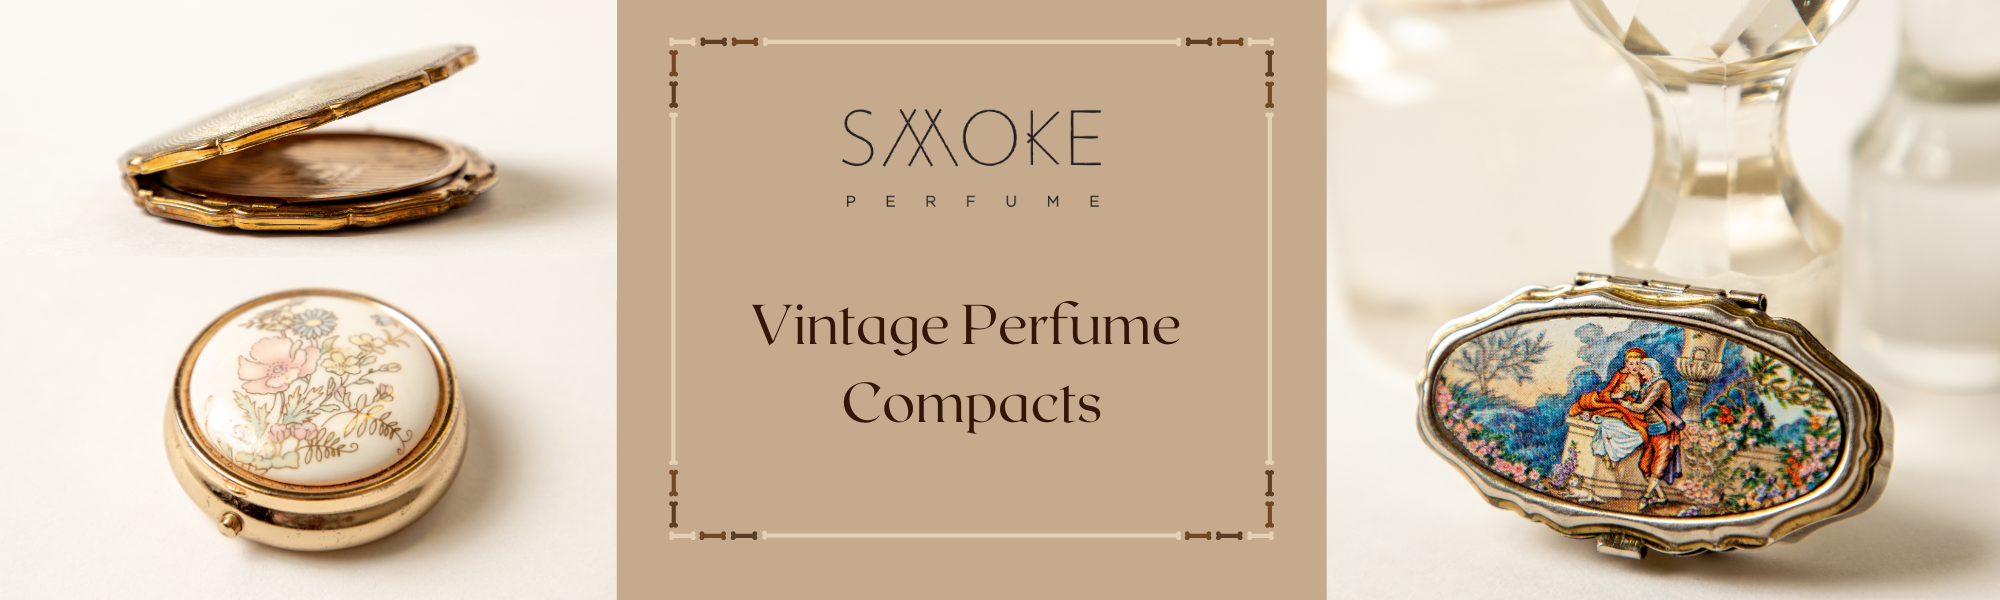 Vintage Perfume Compacts